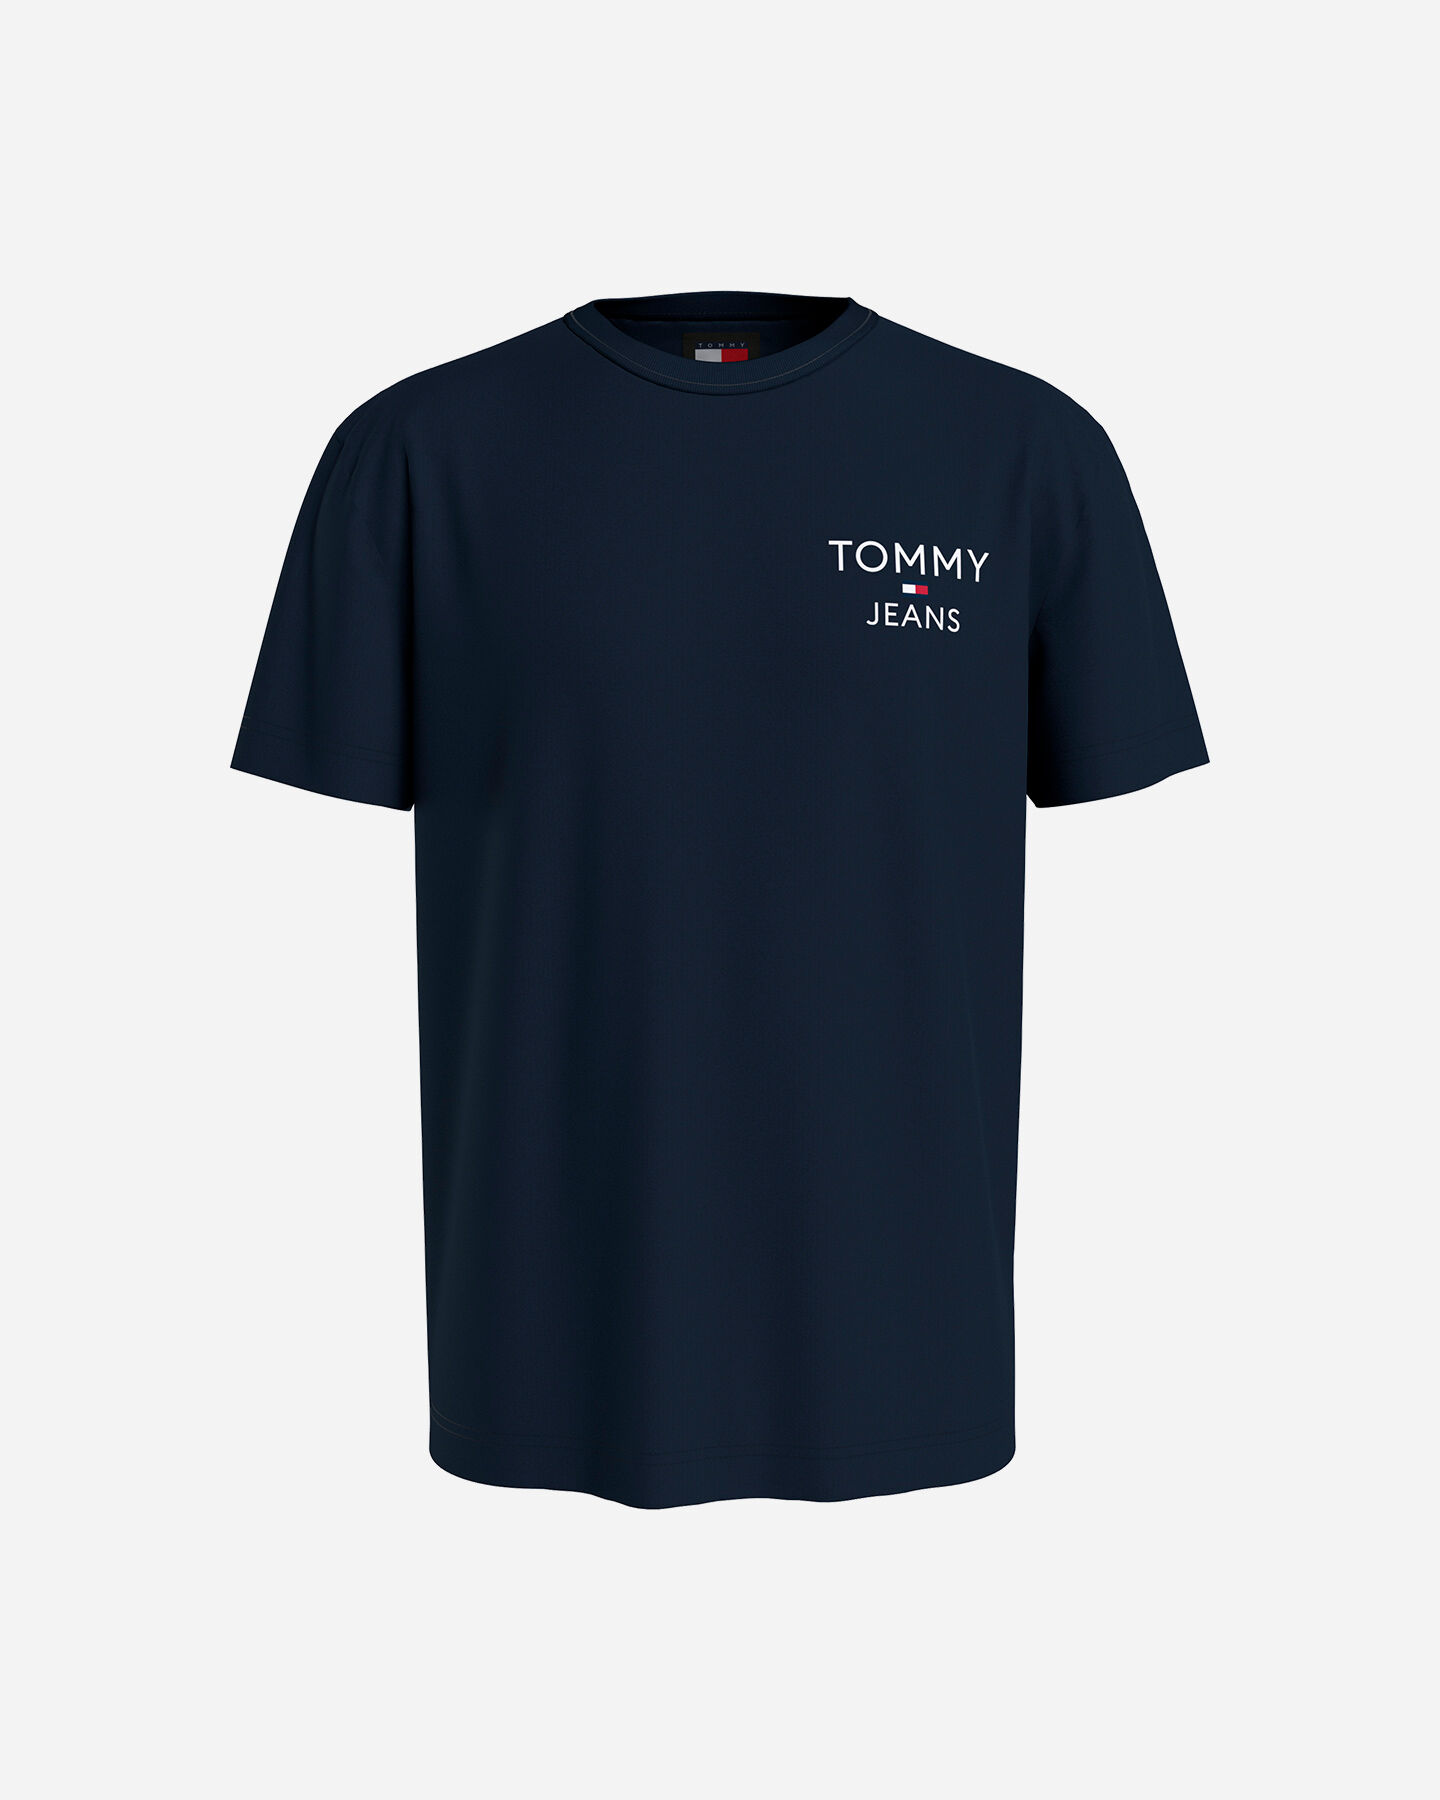  T-Shirt TOMMY HILFIGER SMALL LOGO M S5689919|UNI|S scatto 0